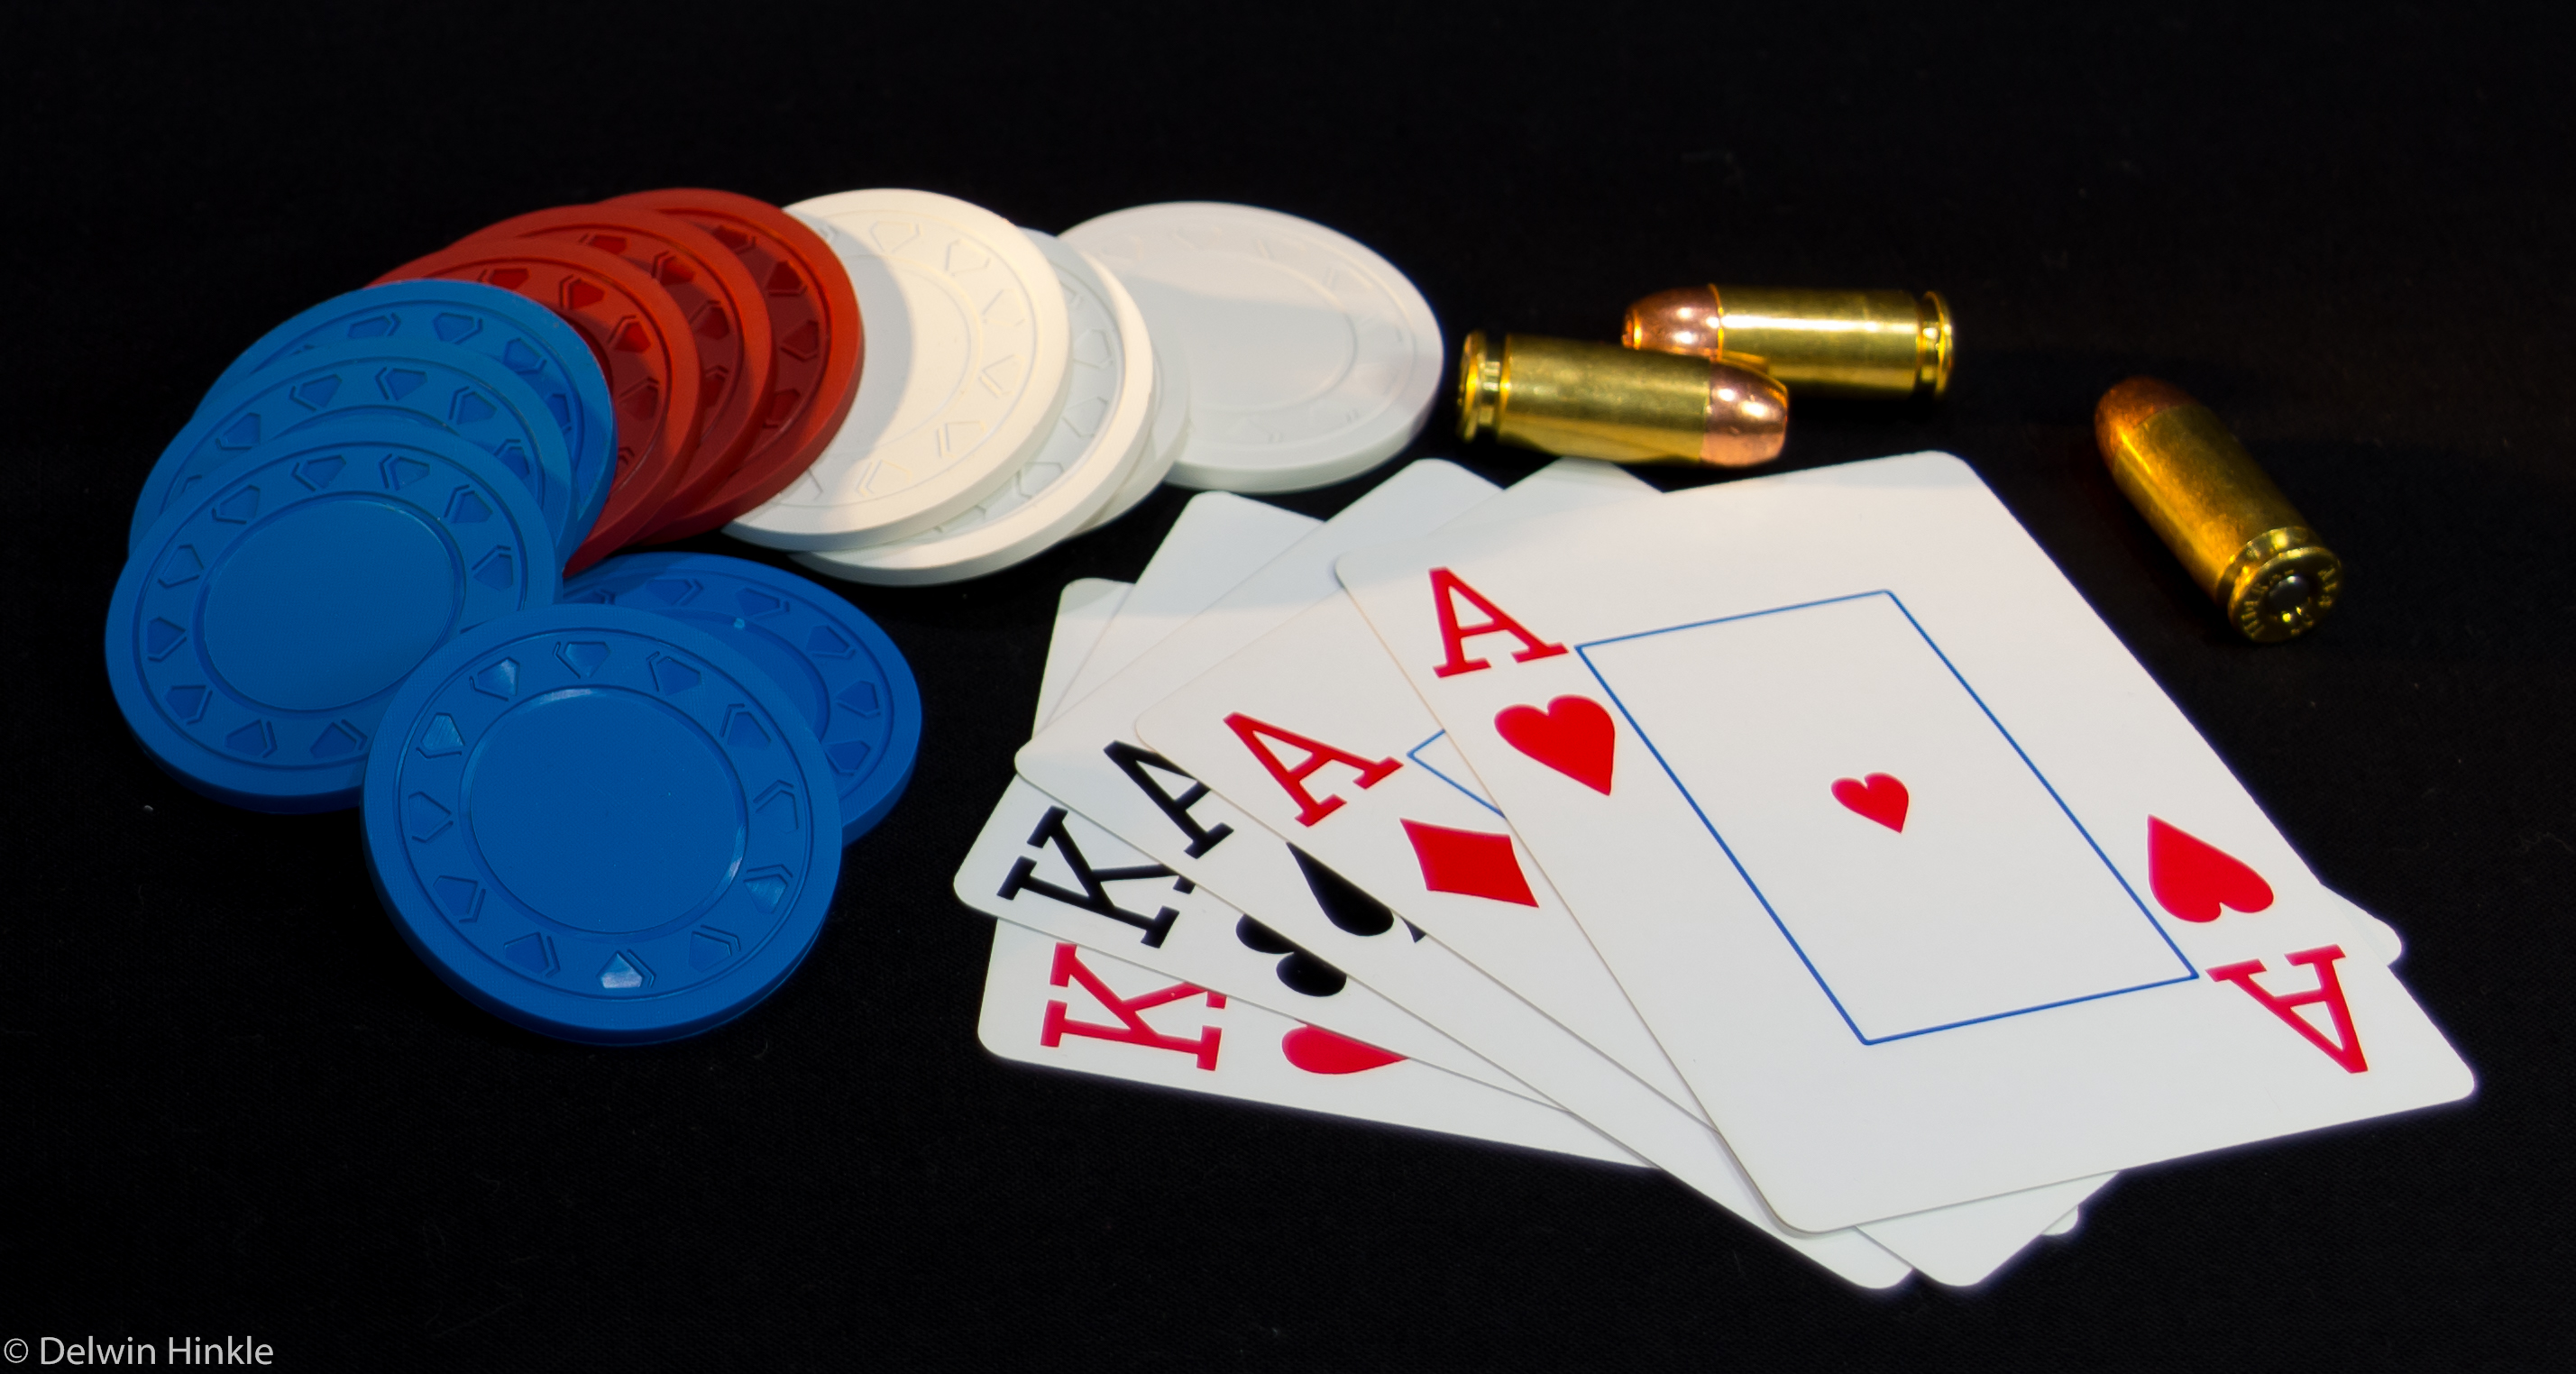 Personal defense is very similar to a poker game. You can win with luck alone, but having a plan and being prepared increases your odds significantly. Photo: author 